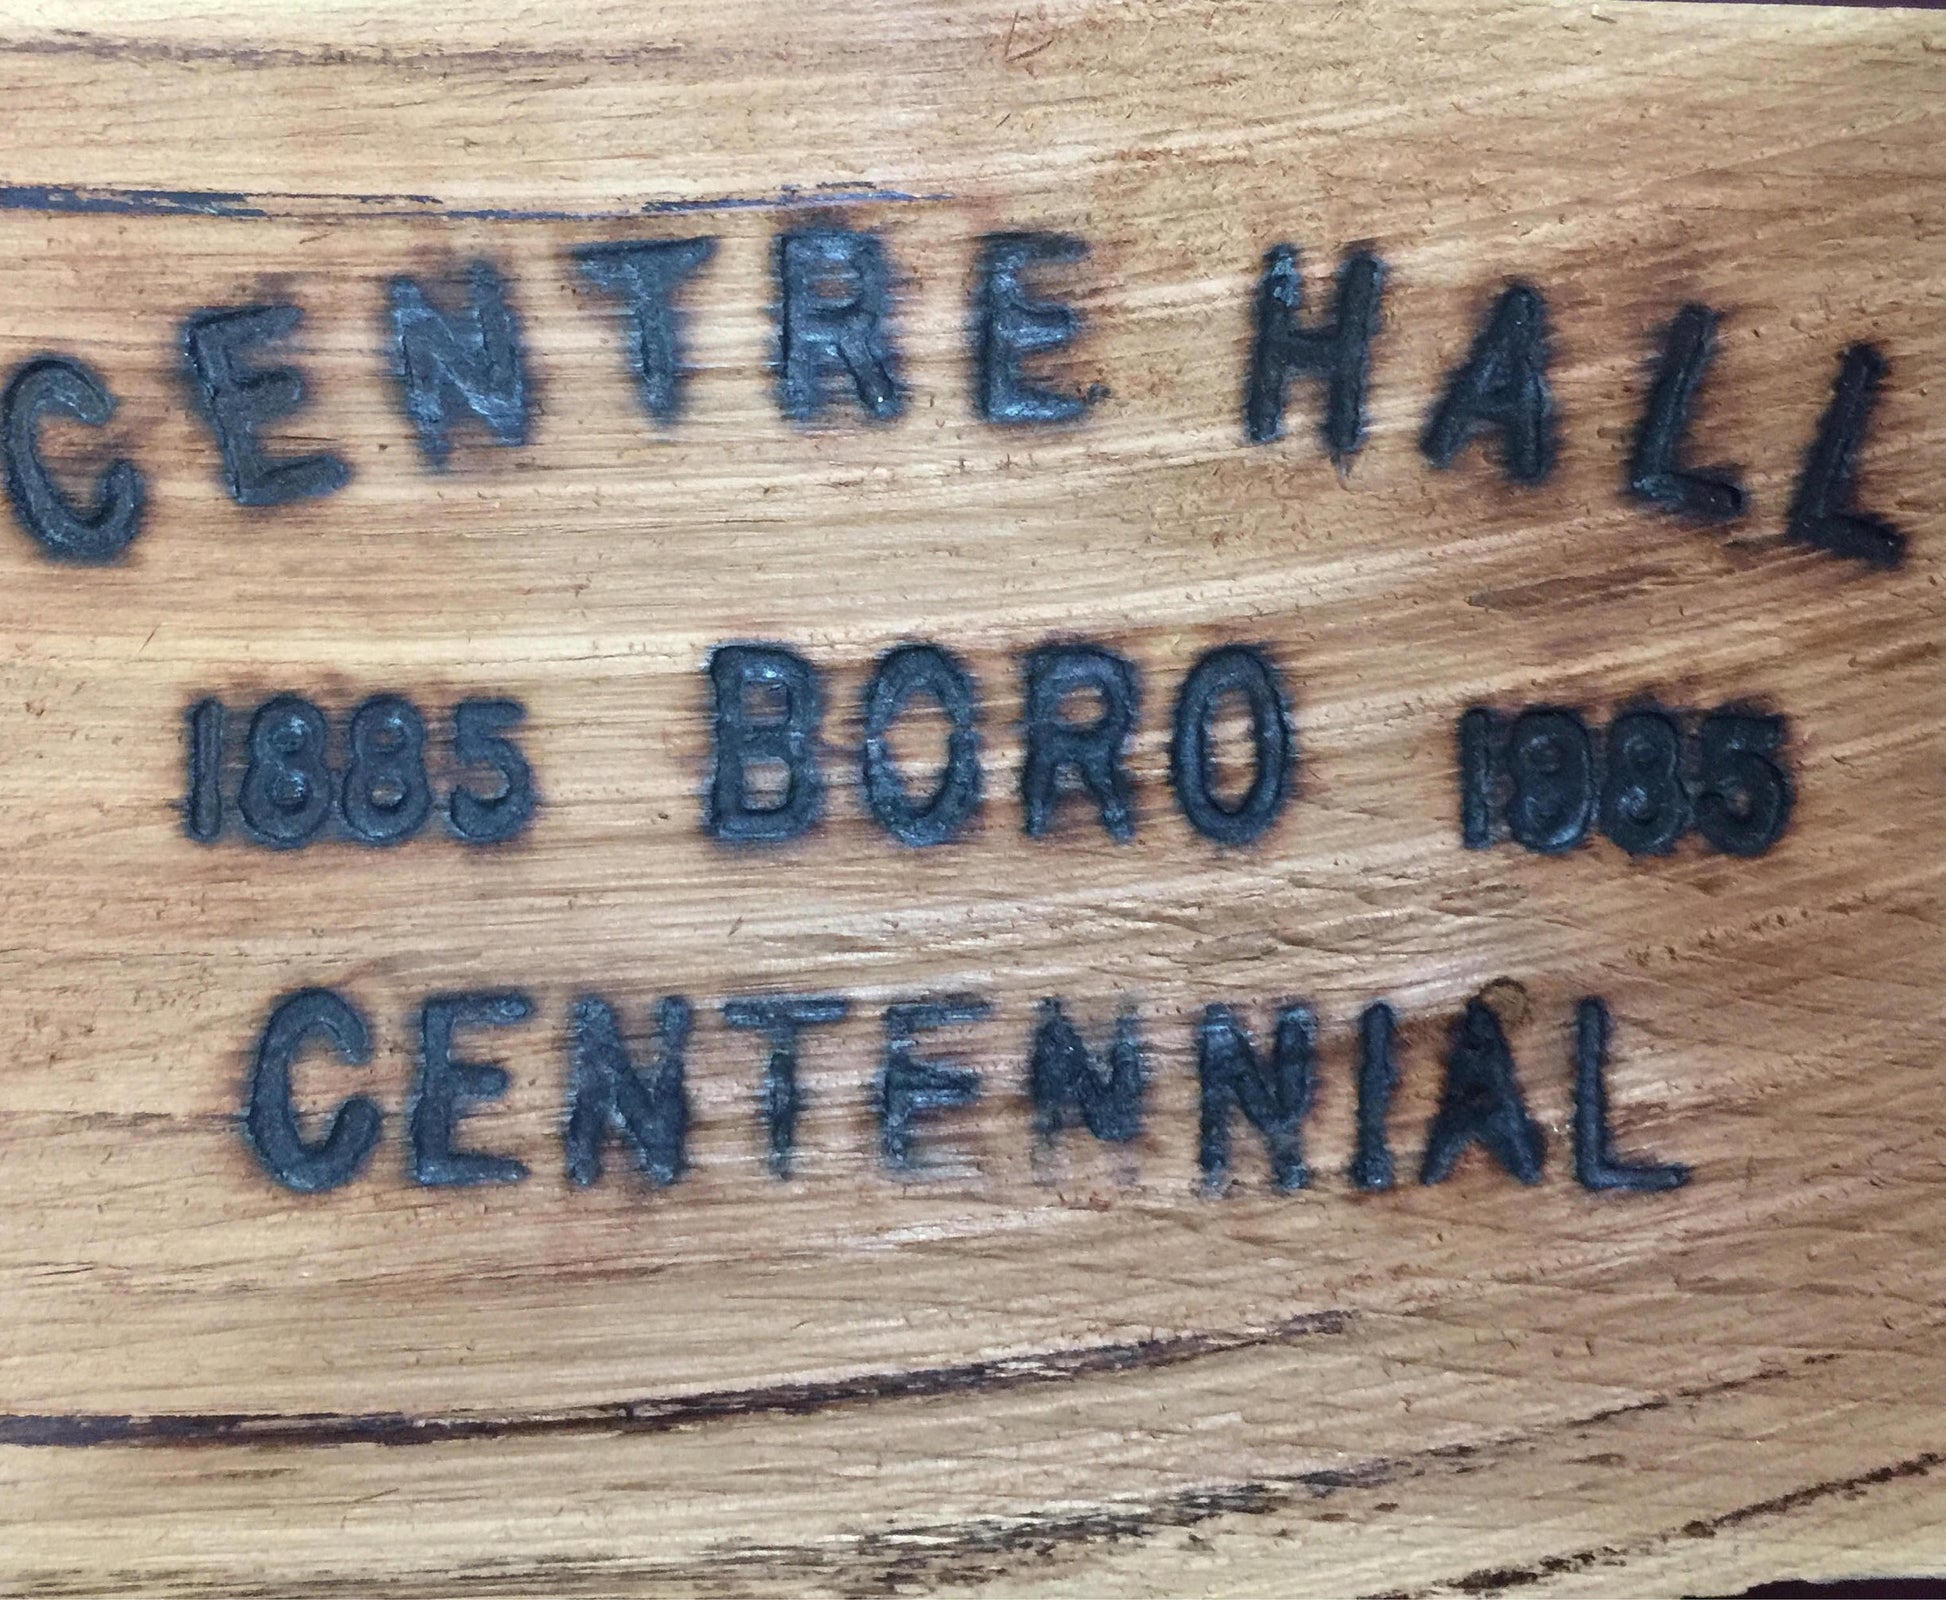 Vintage Collectible 1995 Centre Hall Boro Centennial 1885-1985 burned into a slab of wood